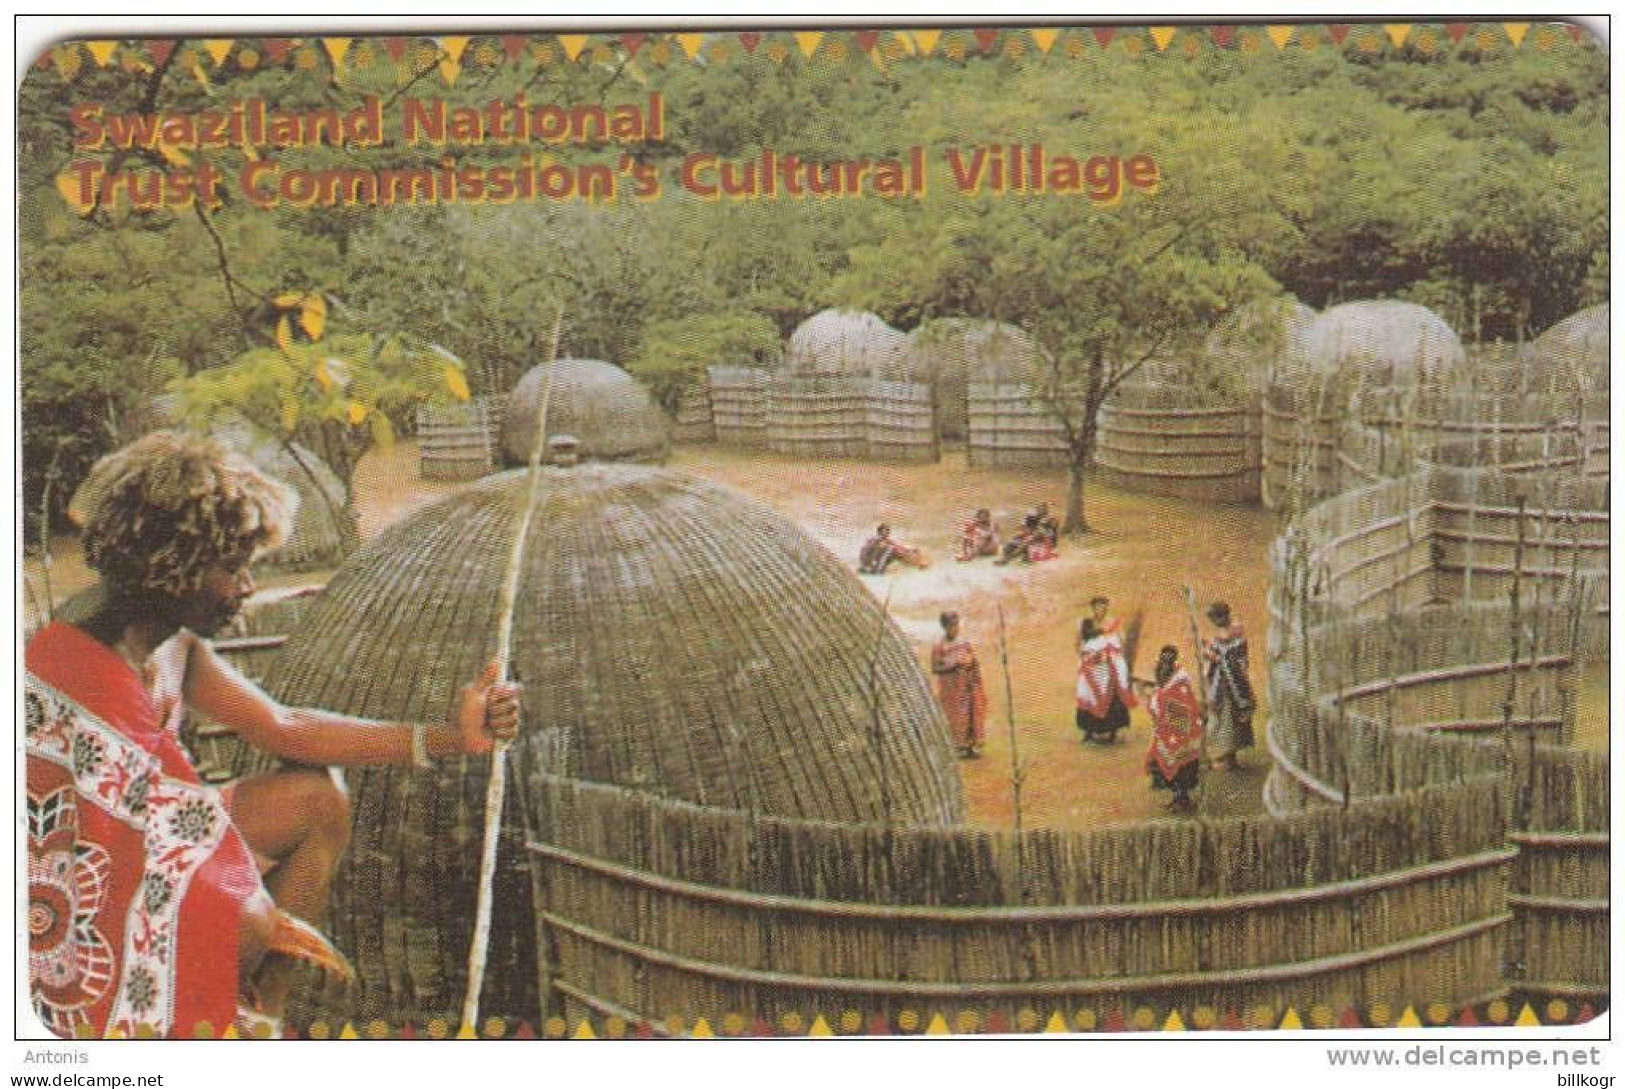 SWAZILAND(chip) - Cultural Village, Flag, Exp.date 03/01, Used - Swasiland